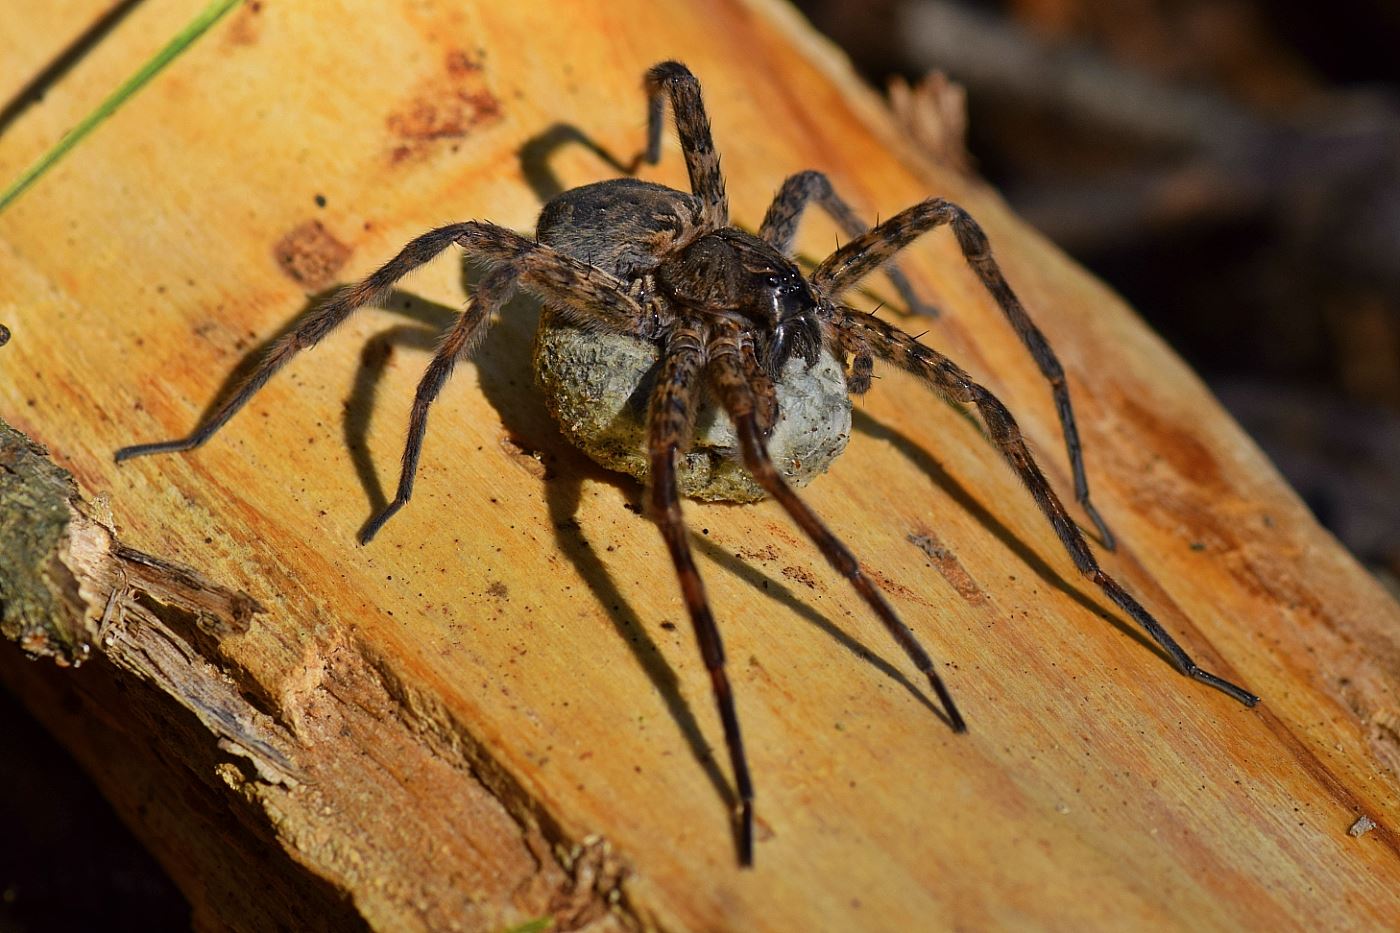 File:Fishing Spider With Egg Sac (21519878240).jpg - Wikimedia Commons